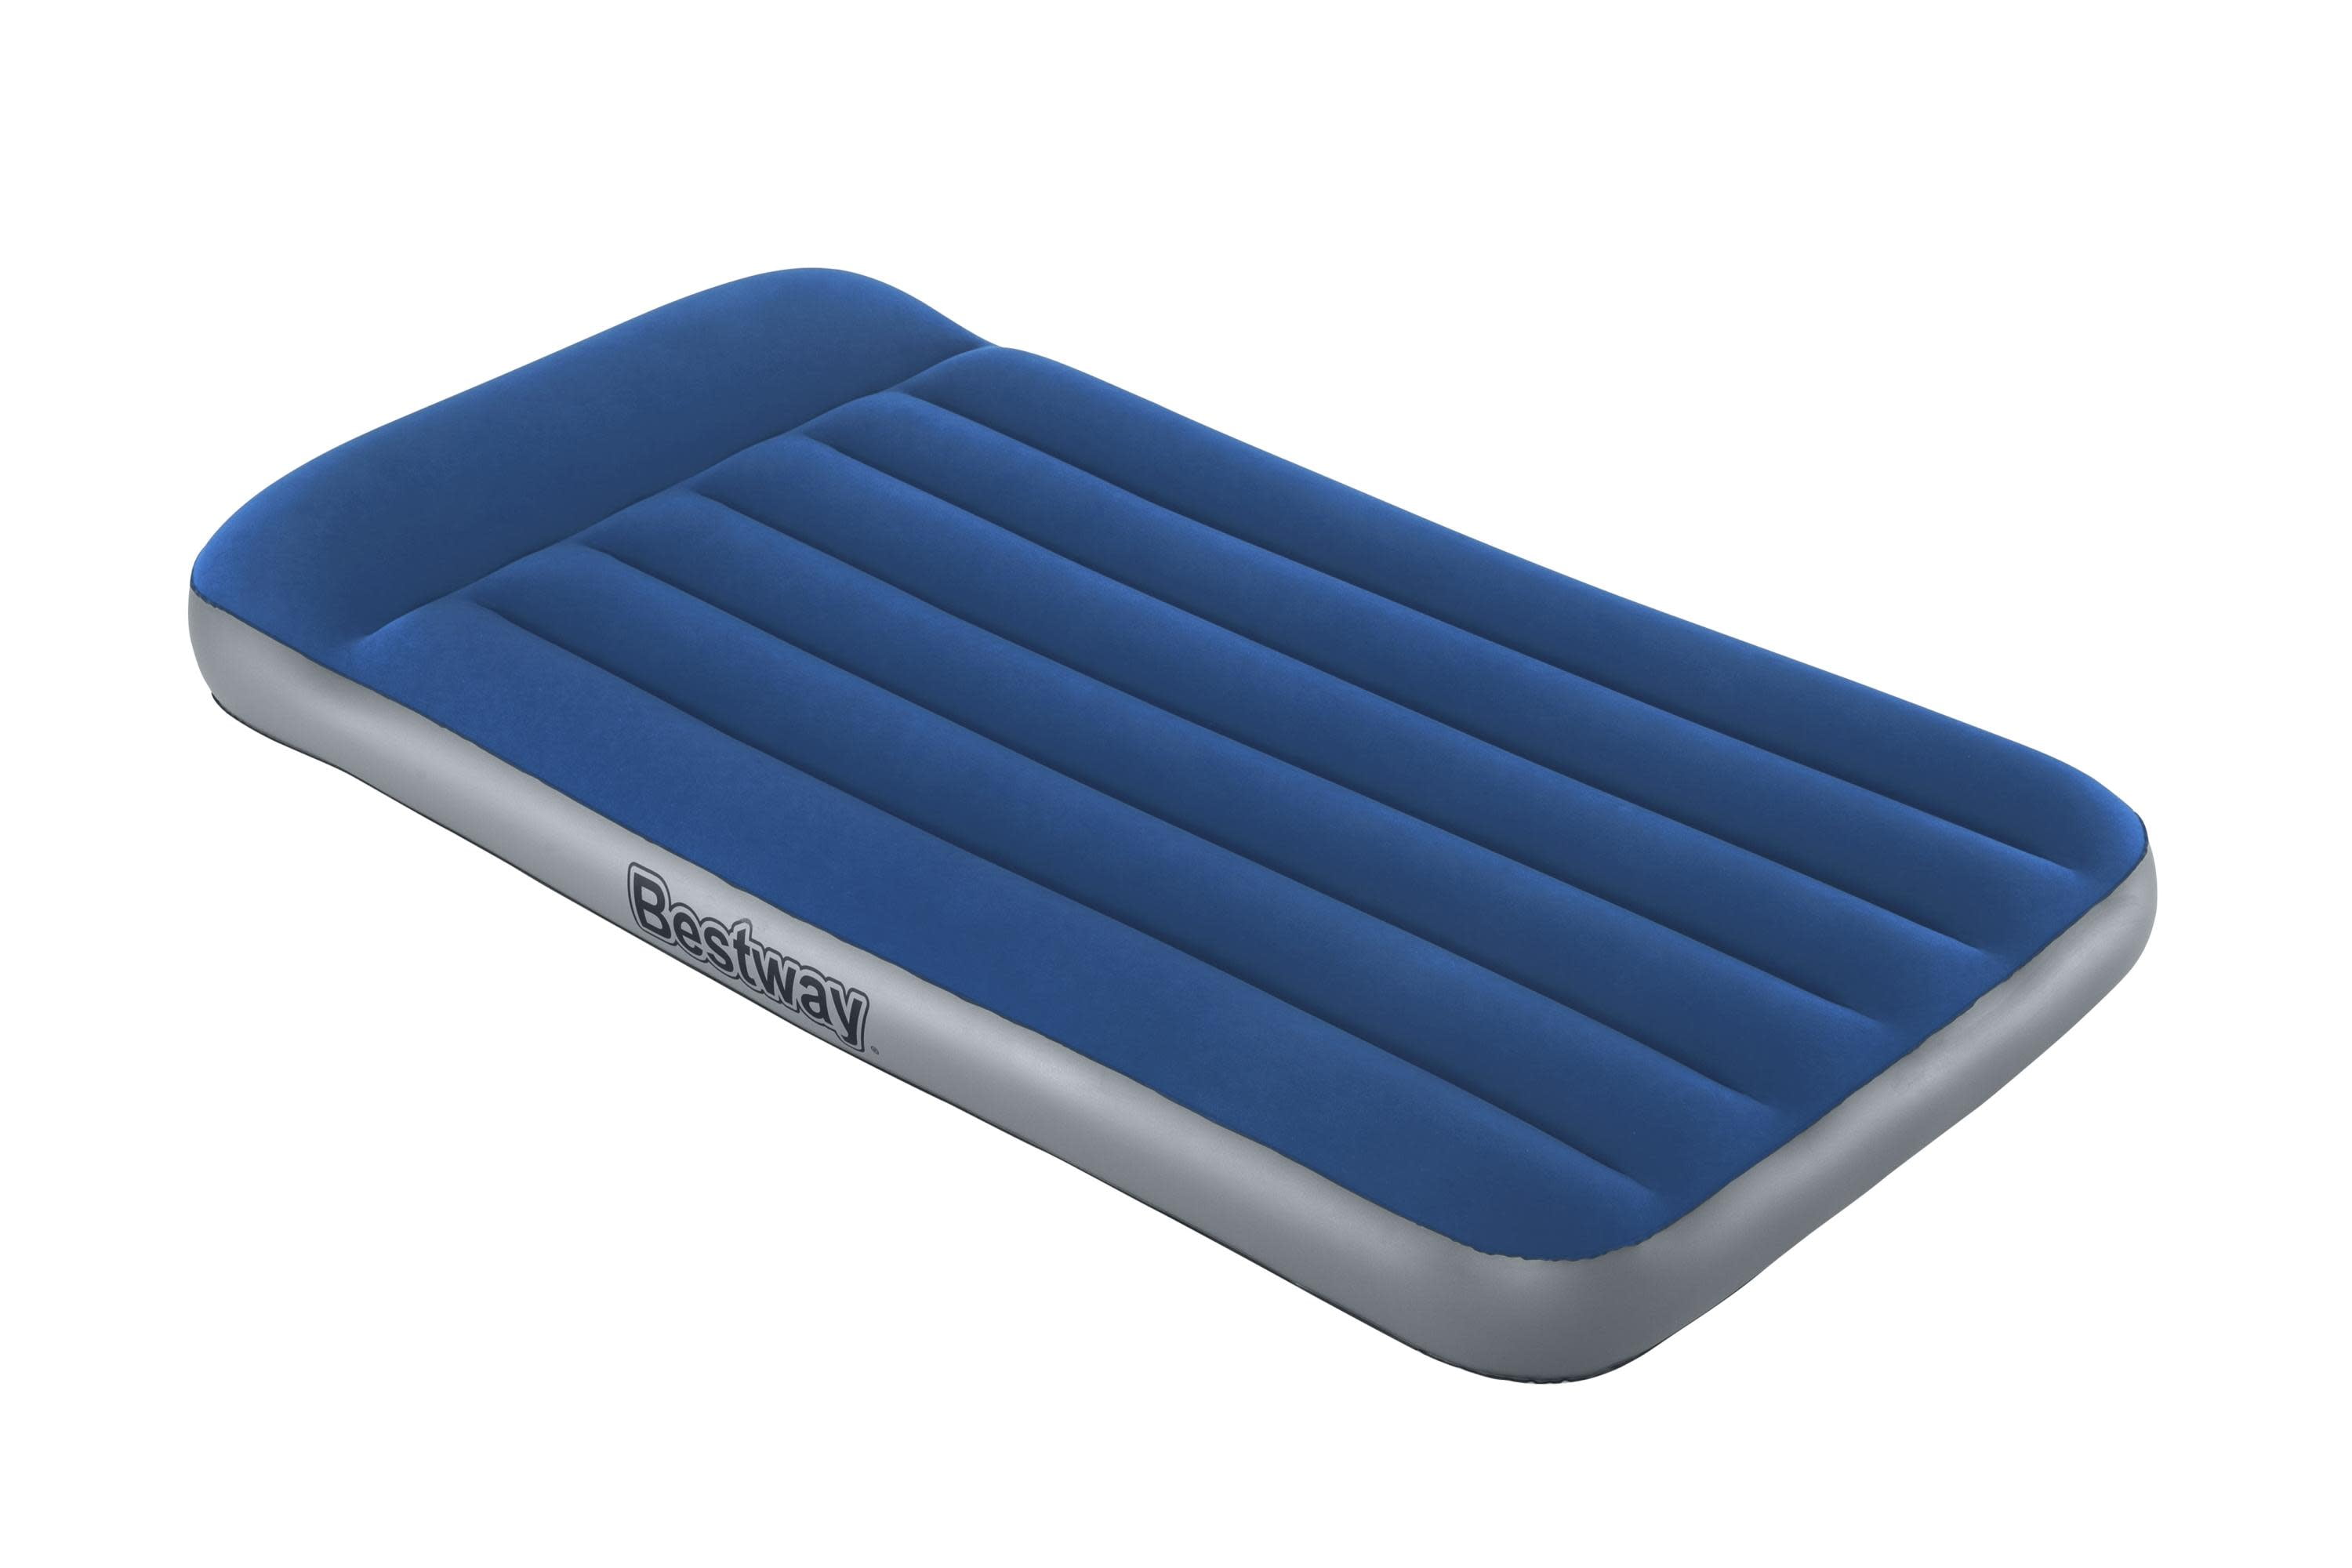 SLEEPING BAG-AIR BED COVER- SINGLE(S) / DOUBLE(S)